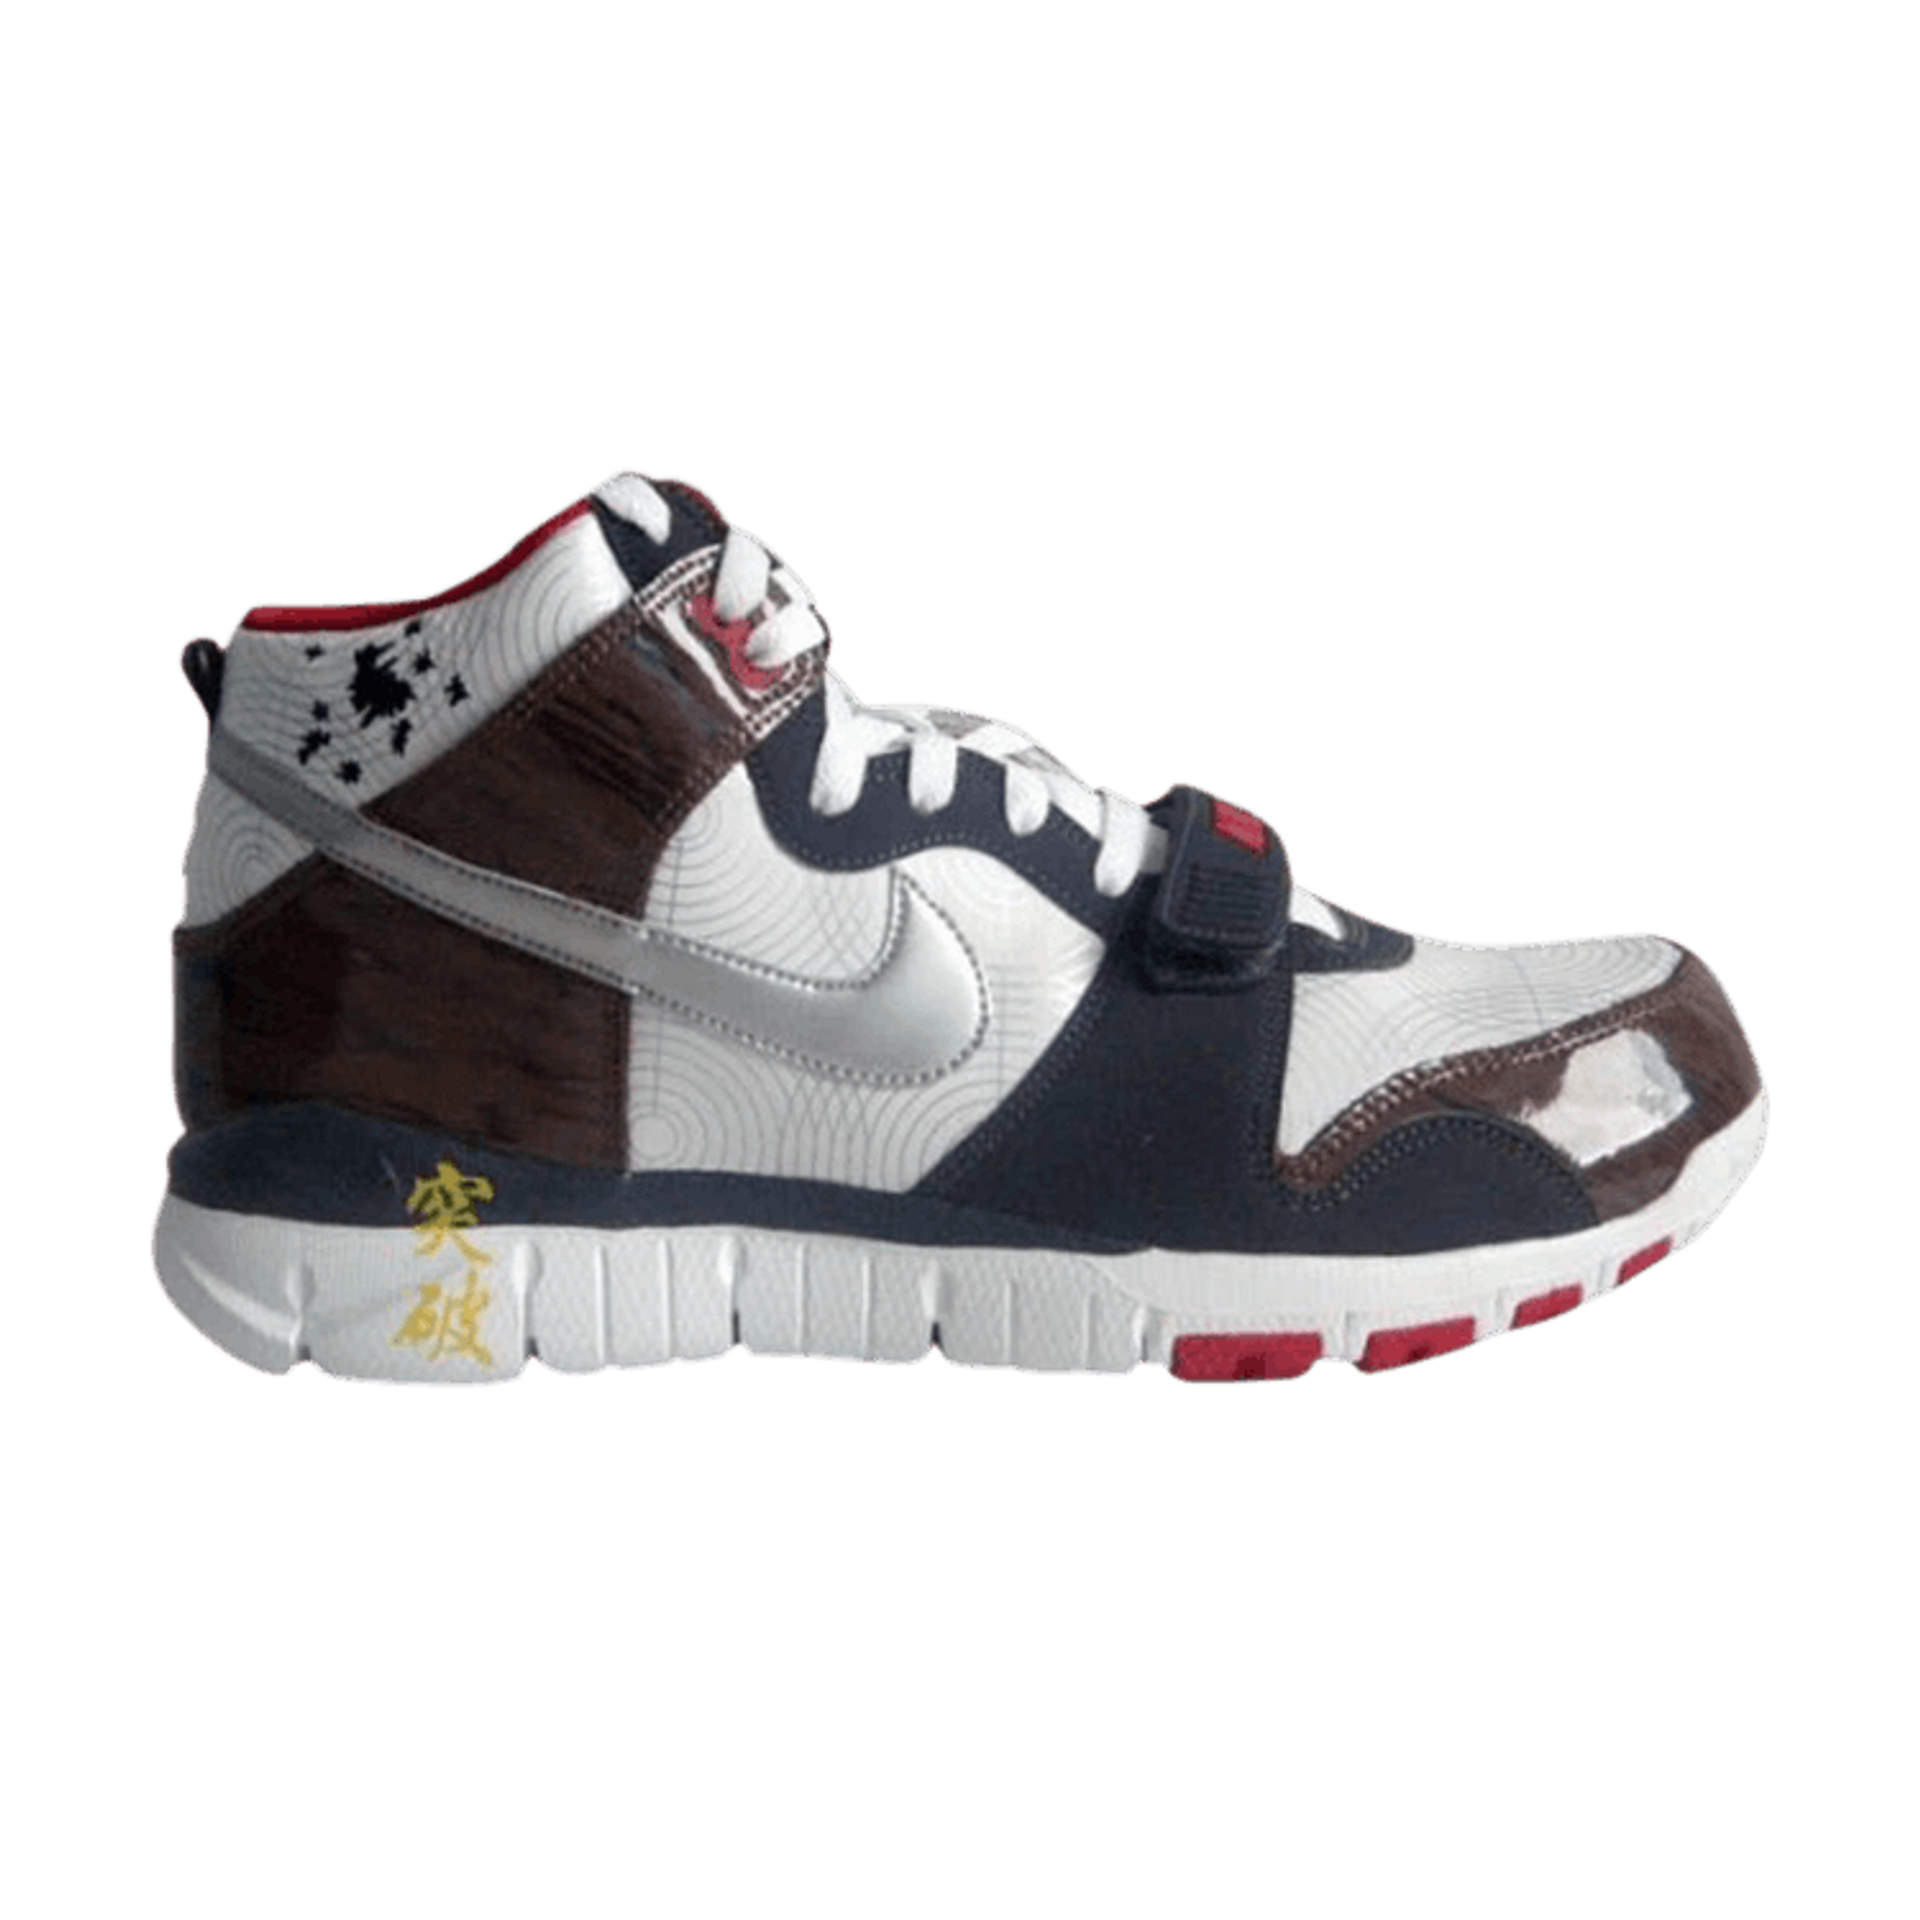 Trainer Dunk High BT 'China 1984 Olympics Pack'